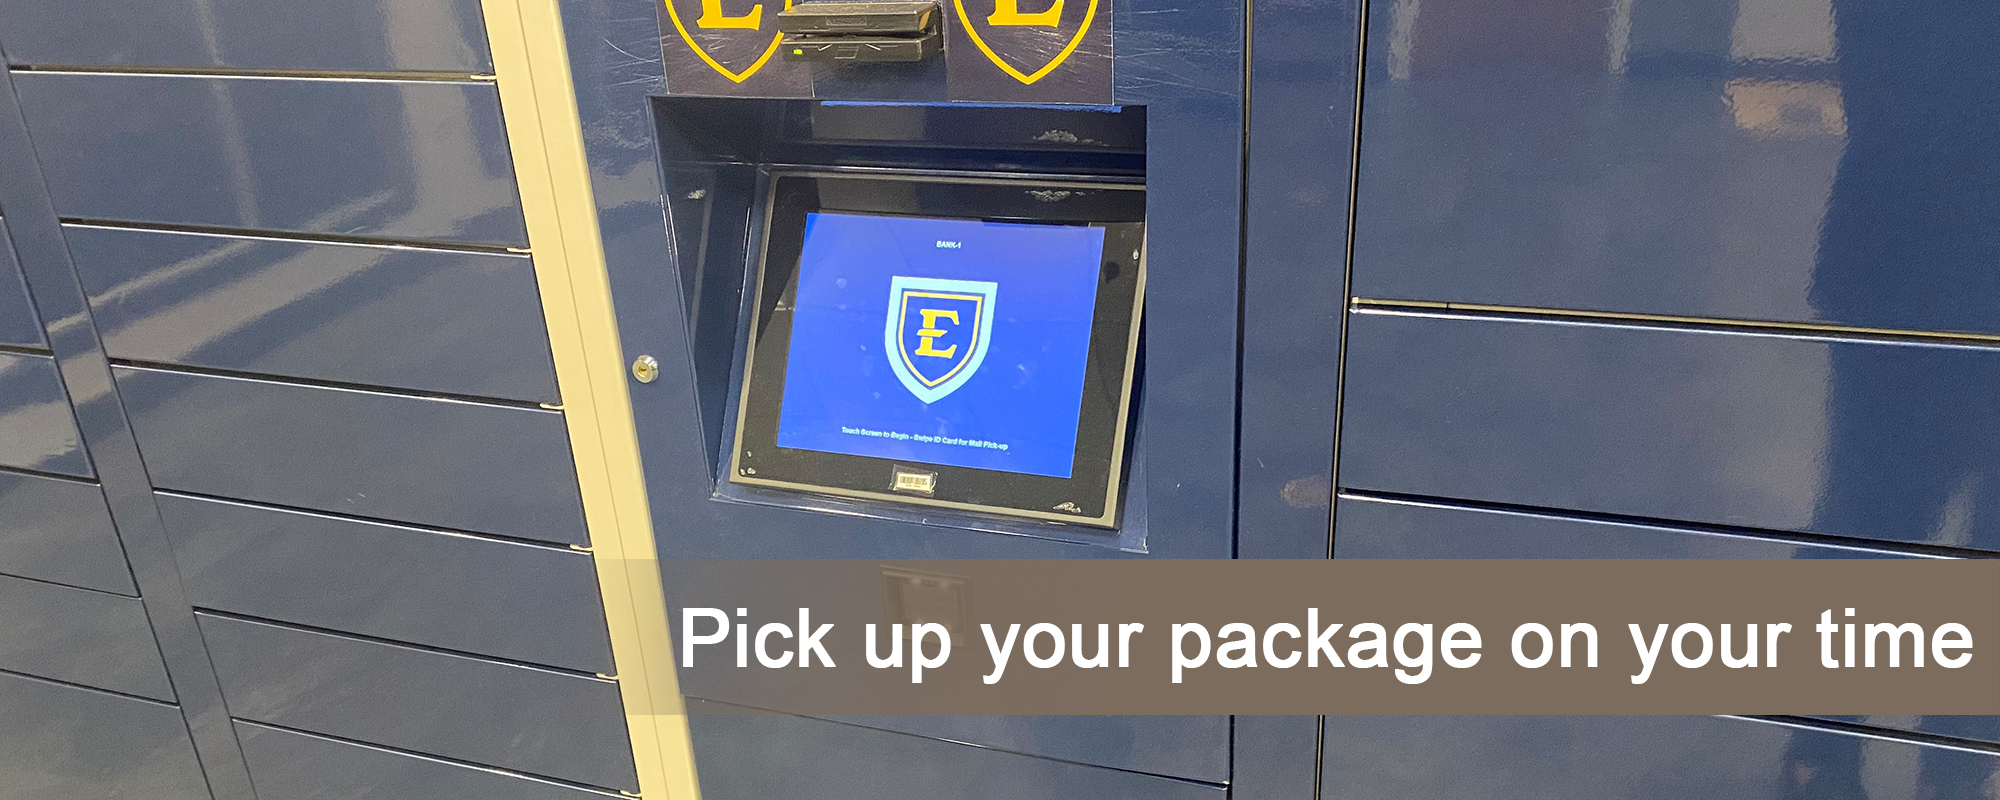 Pick up your package on your time